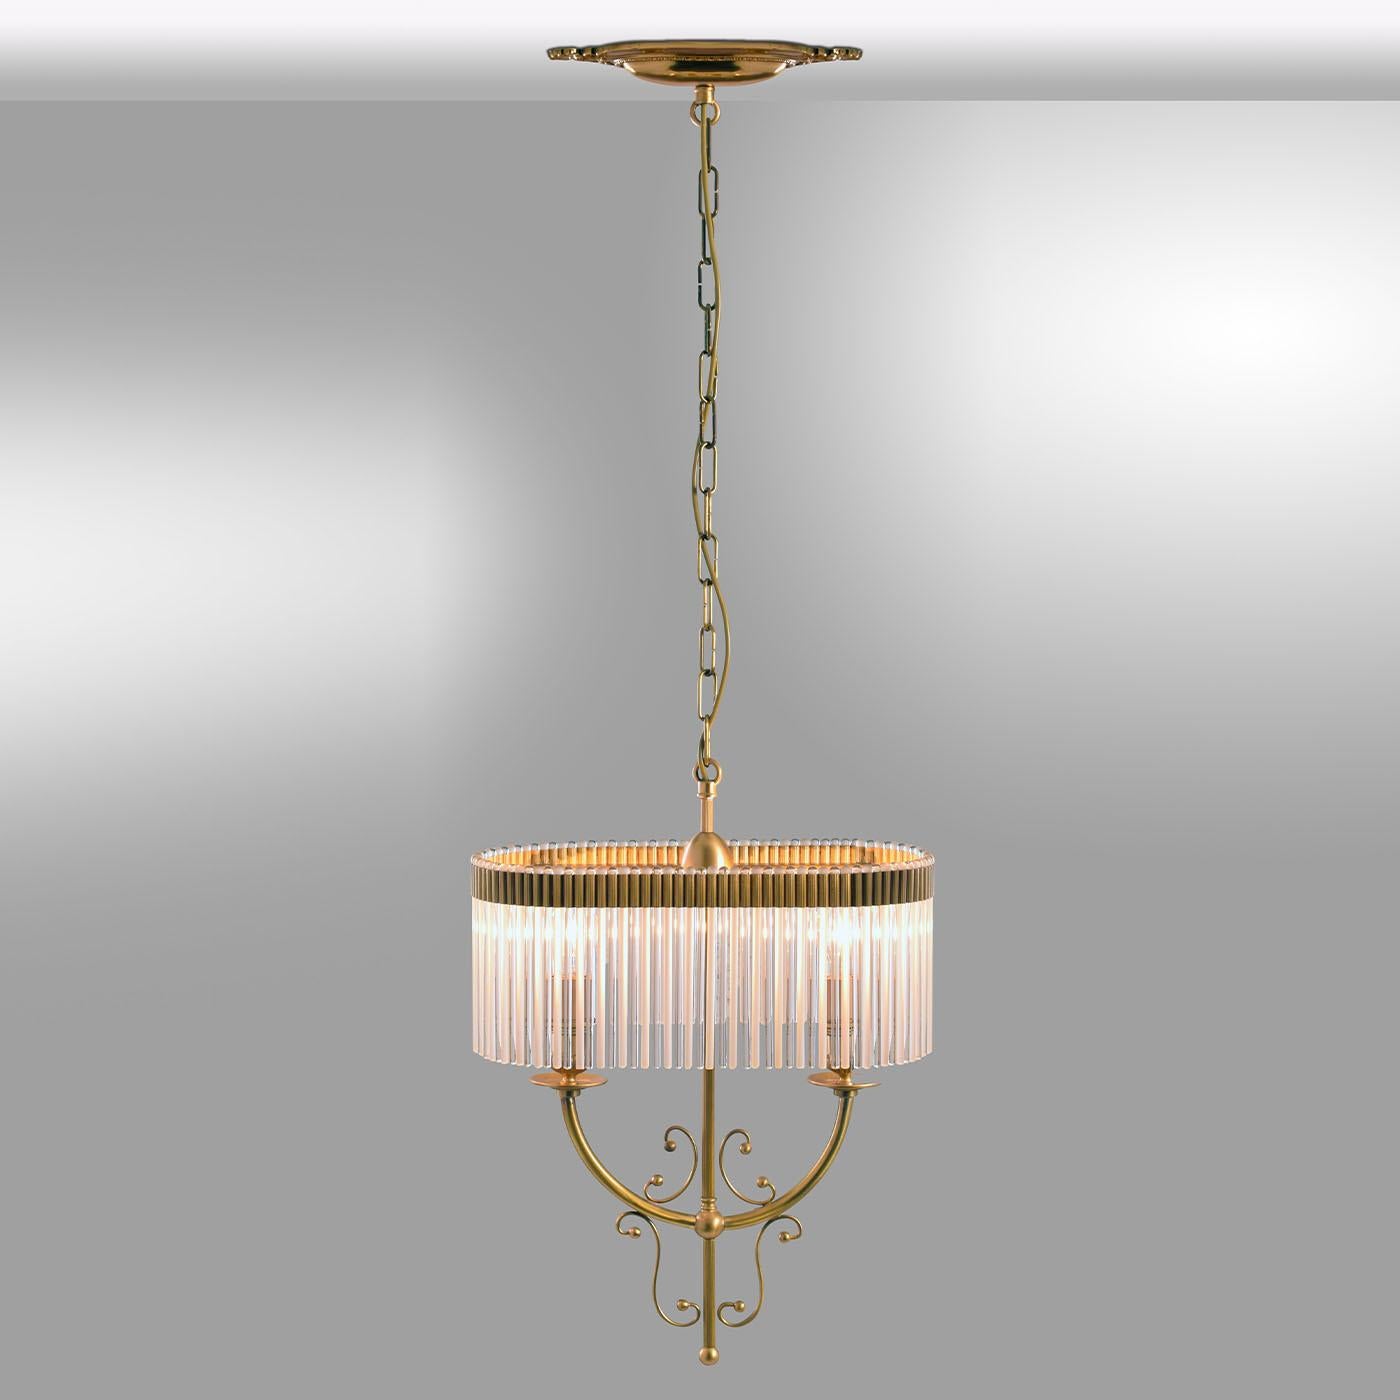 Luxury and elegance merge in this two-light chandelier Luca Bussacchini designed for the Seicento Collection. An array of glass reeds gets neatly juxtaposed to shape the oval-cut shade, which ensures the light coming from the two inner lightbulbs